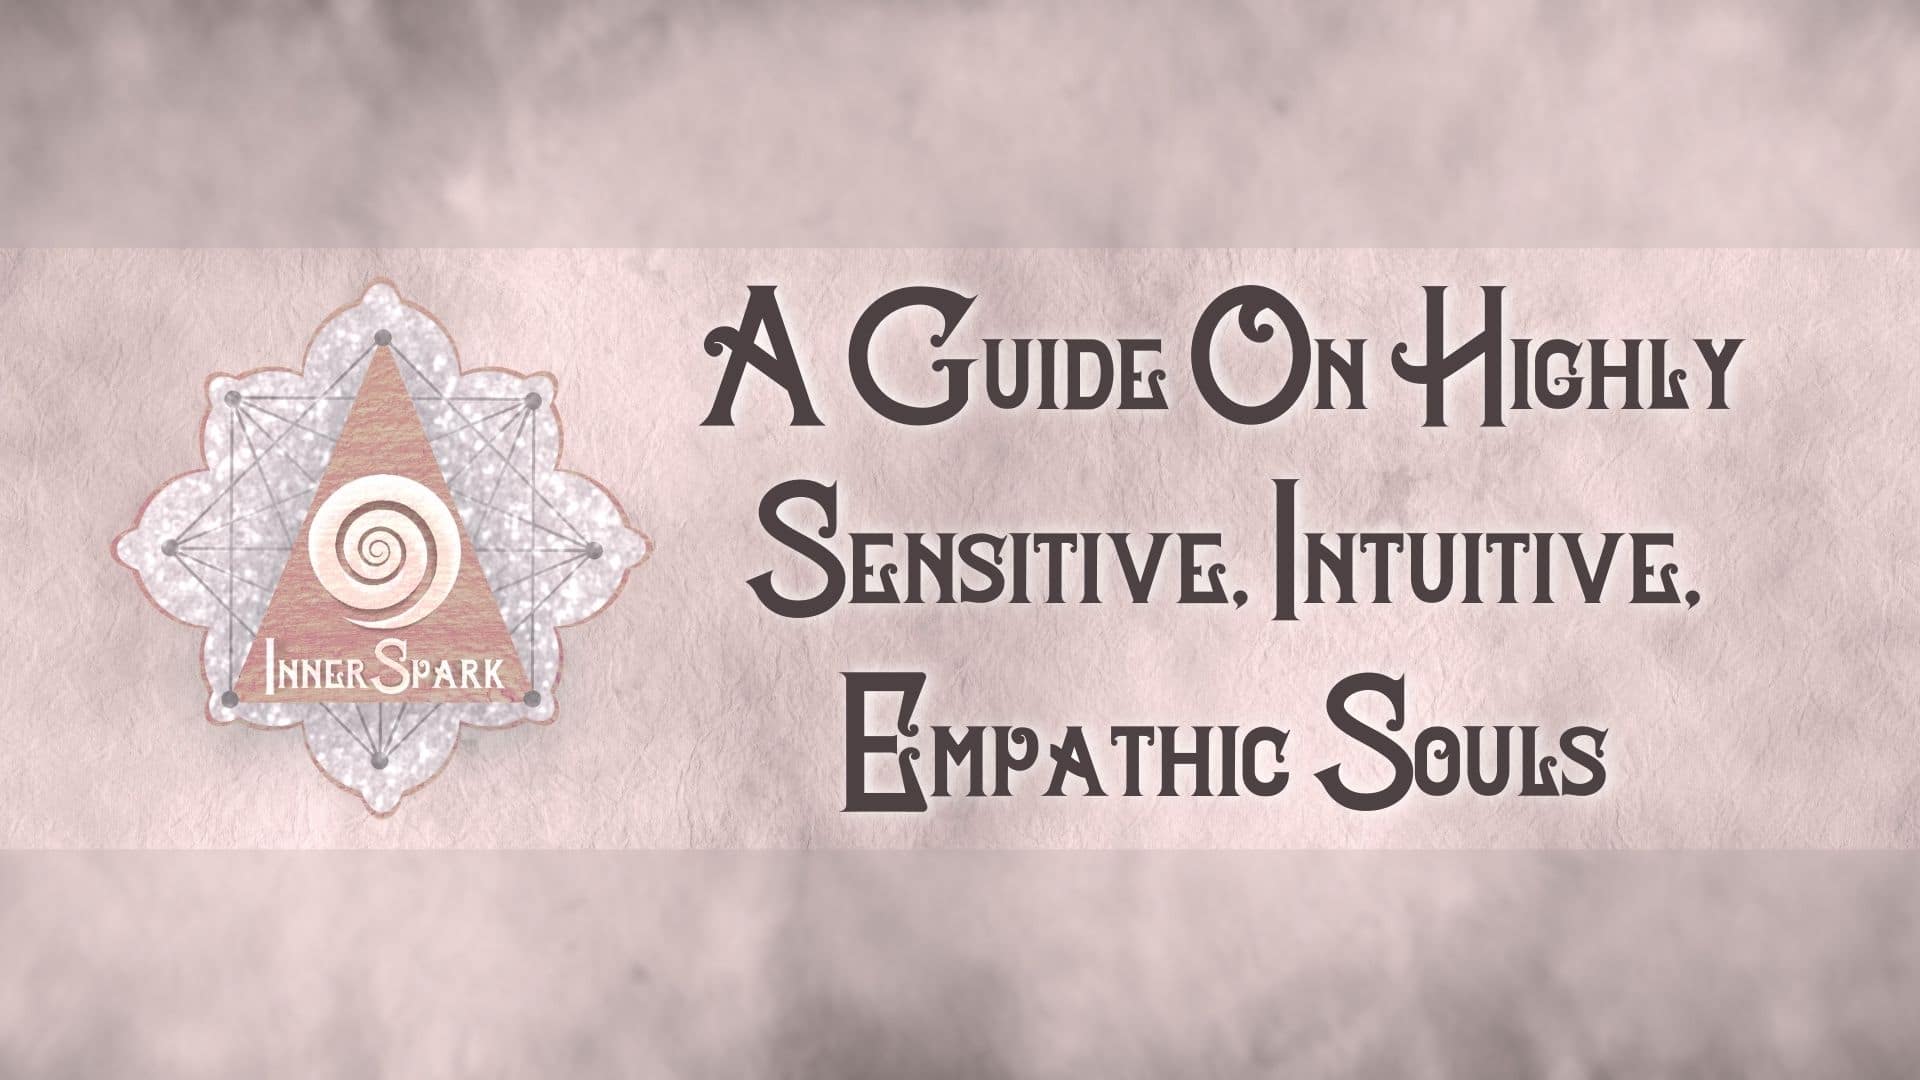 A Guide On Highly Sensitive, Intuitive, Empathic Souls